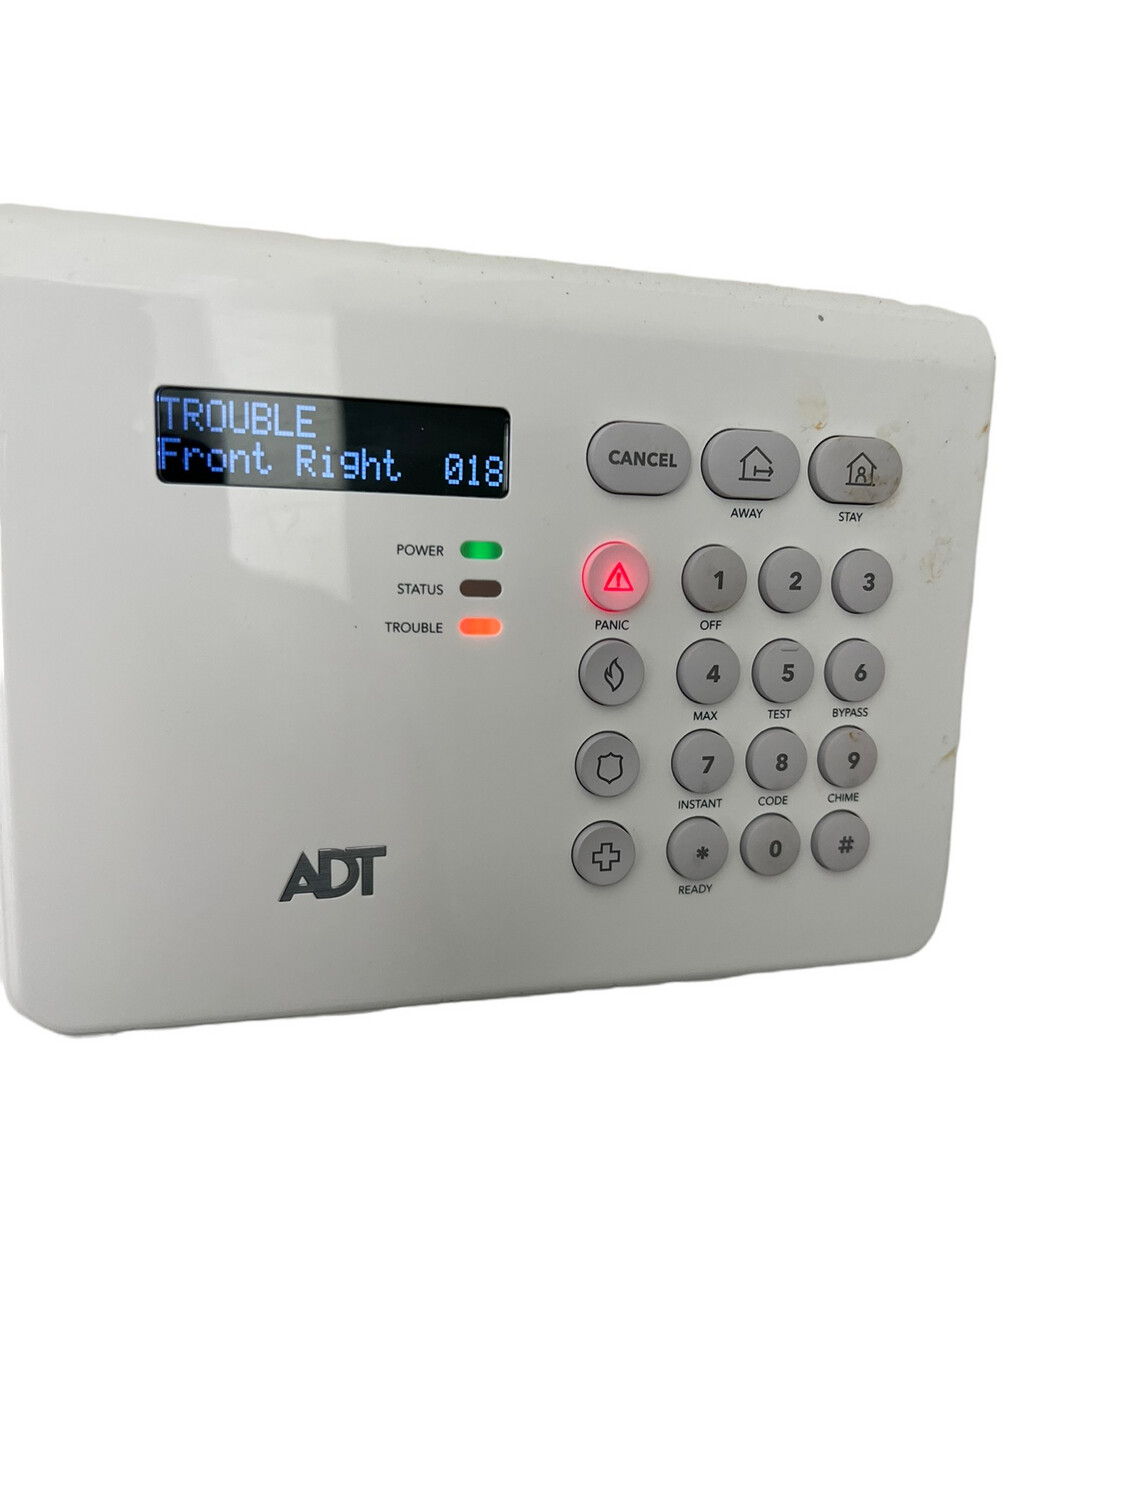 Honeywell ADT 2x16 Home Security Panel ADT2x16AIO-1 ( as is for parts untested)